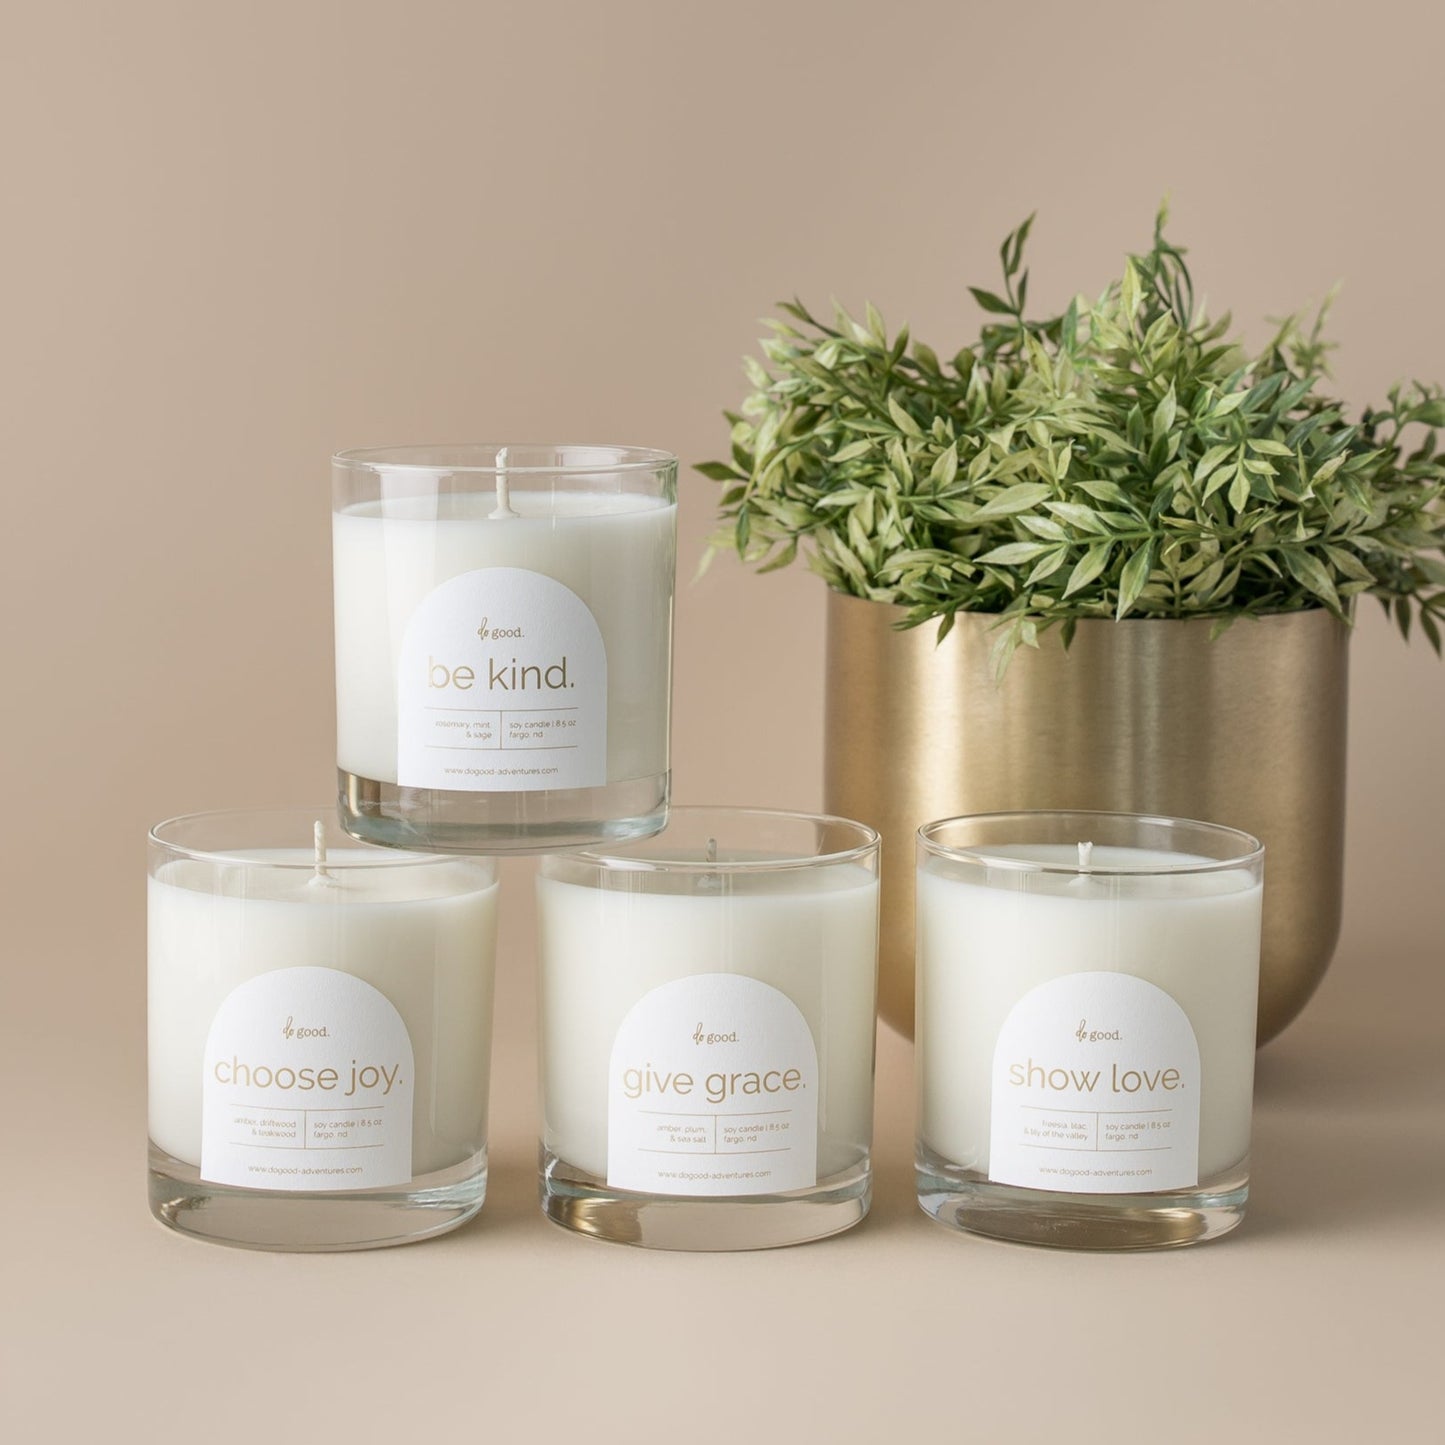 be kind. (a fresh & clean scented soy candle)